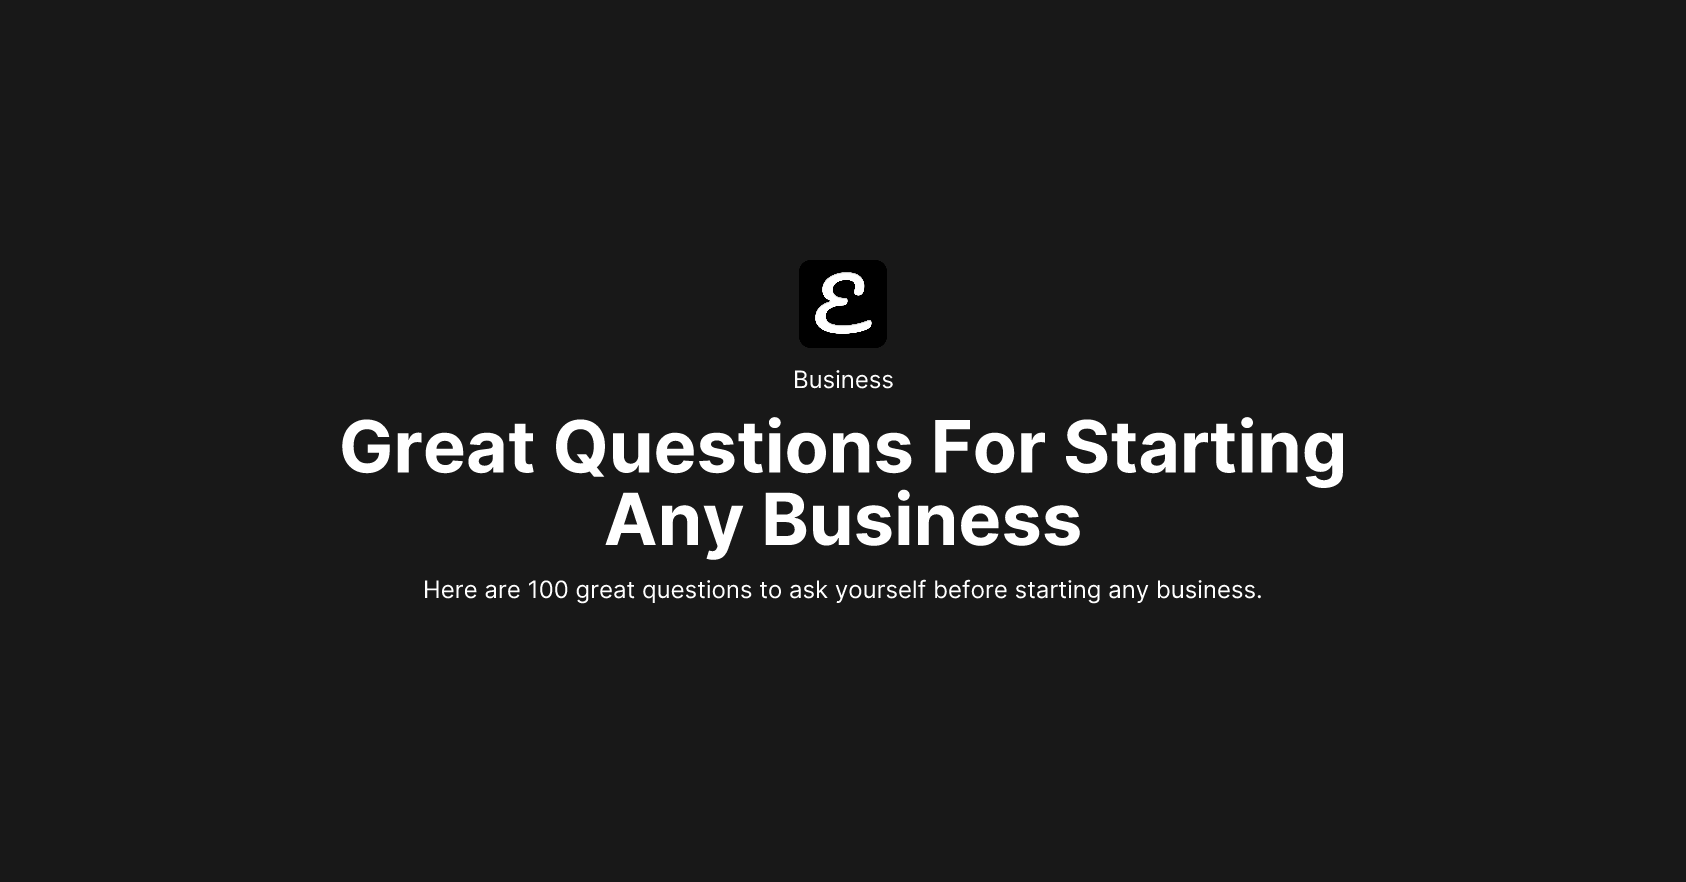 Great Questions For Starting Any Business by Eric David Smith